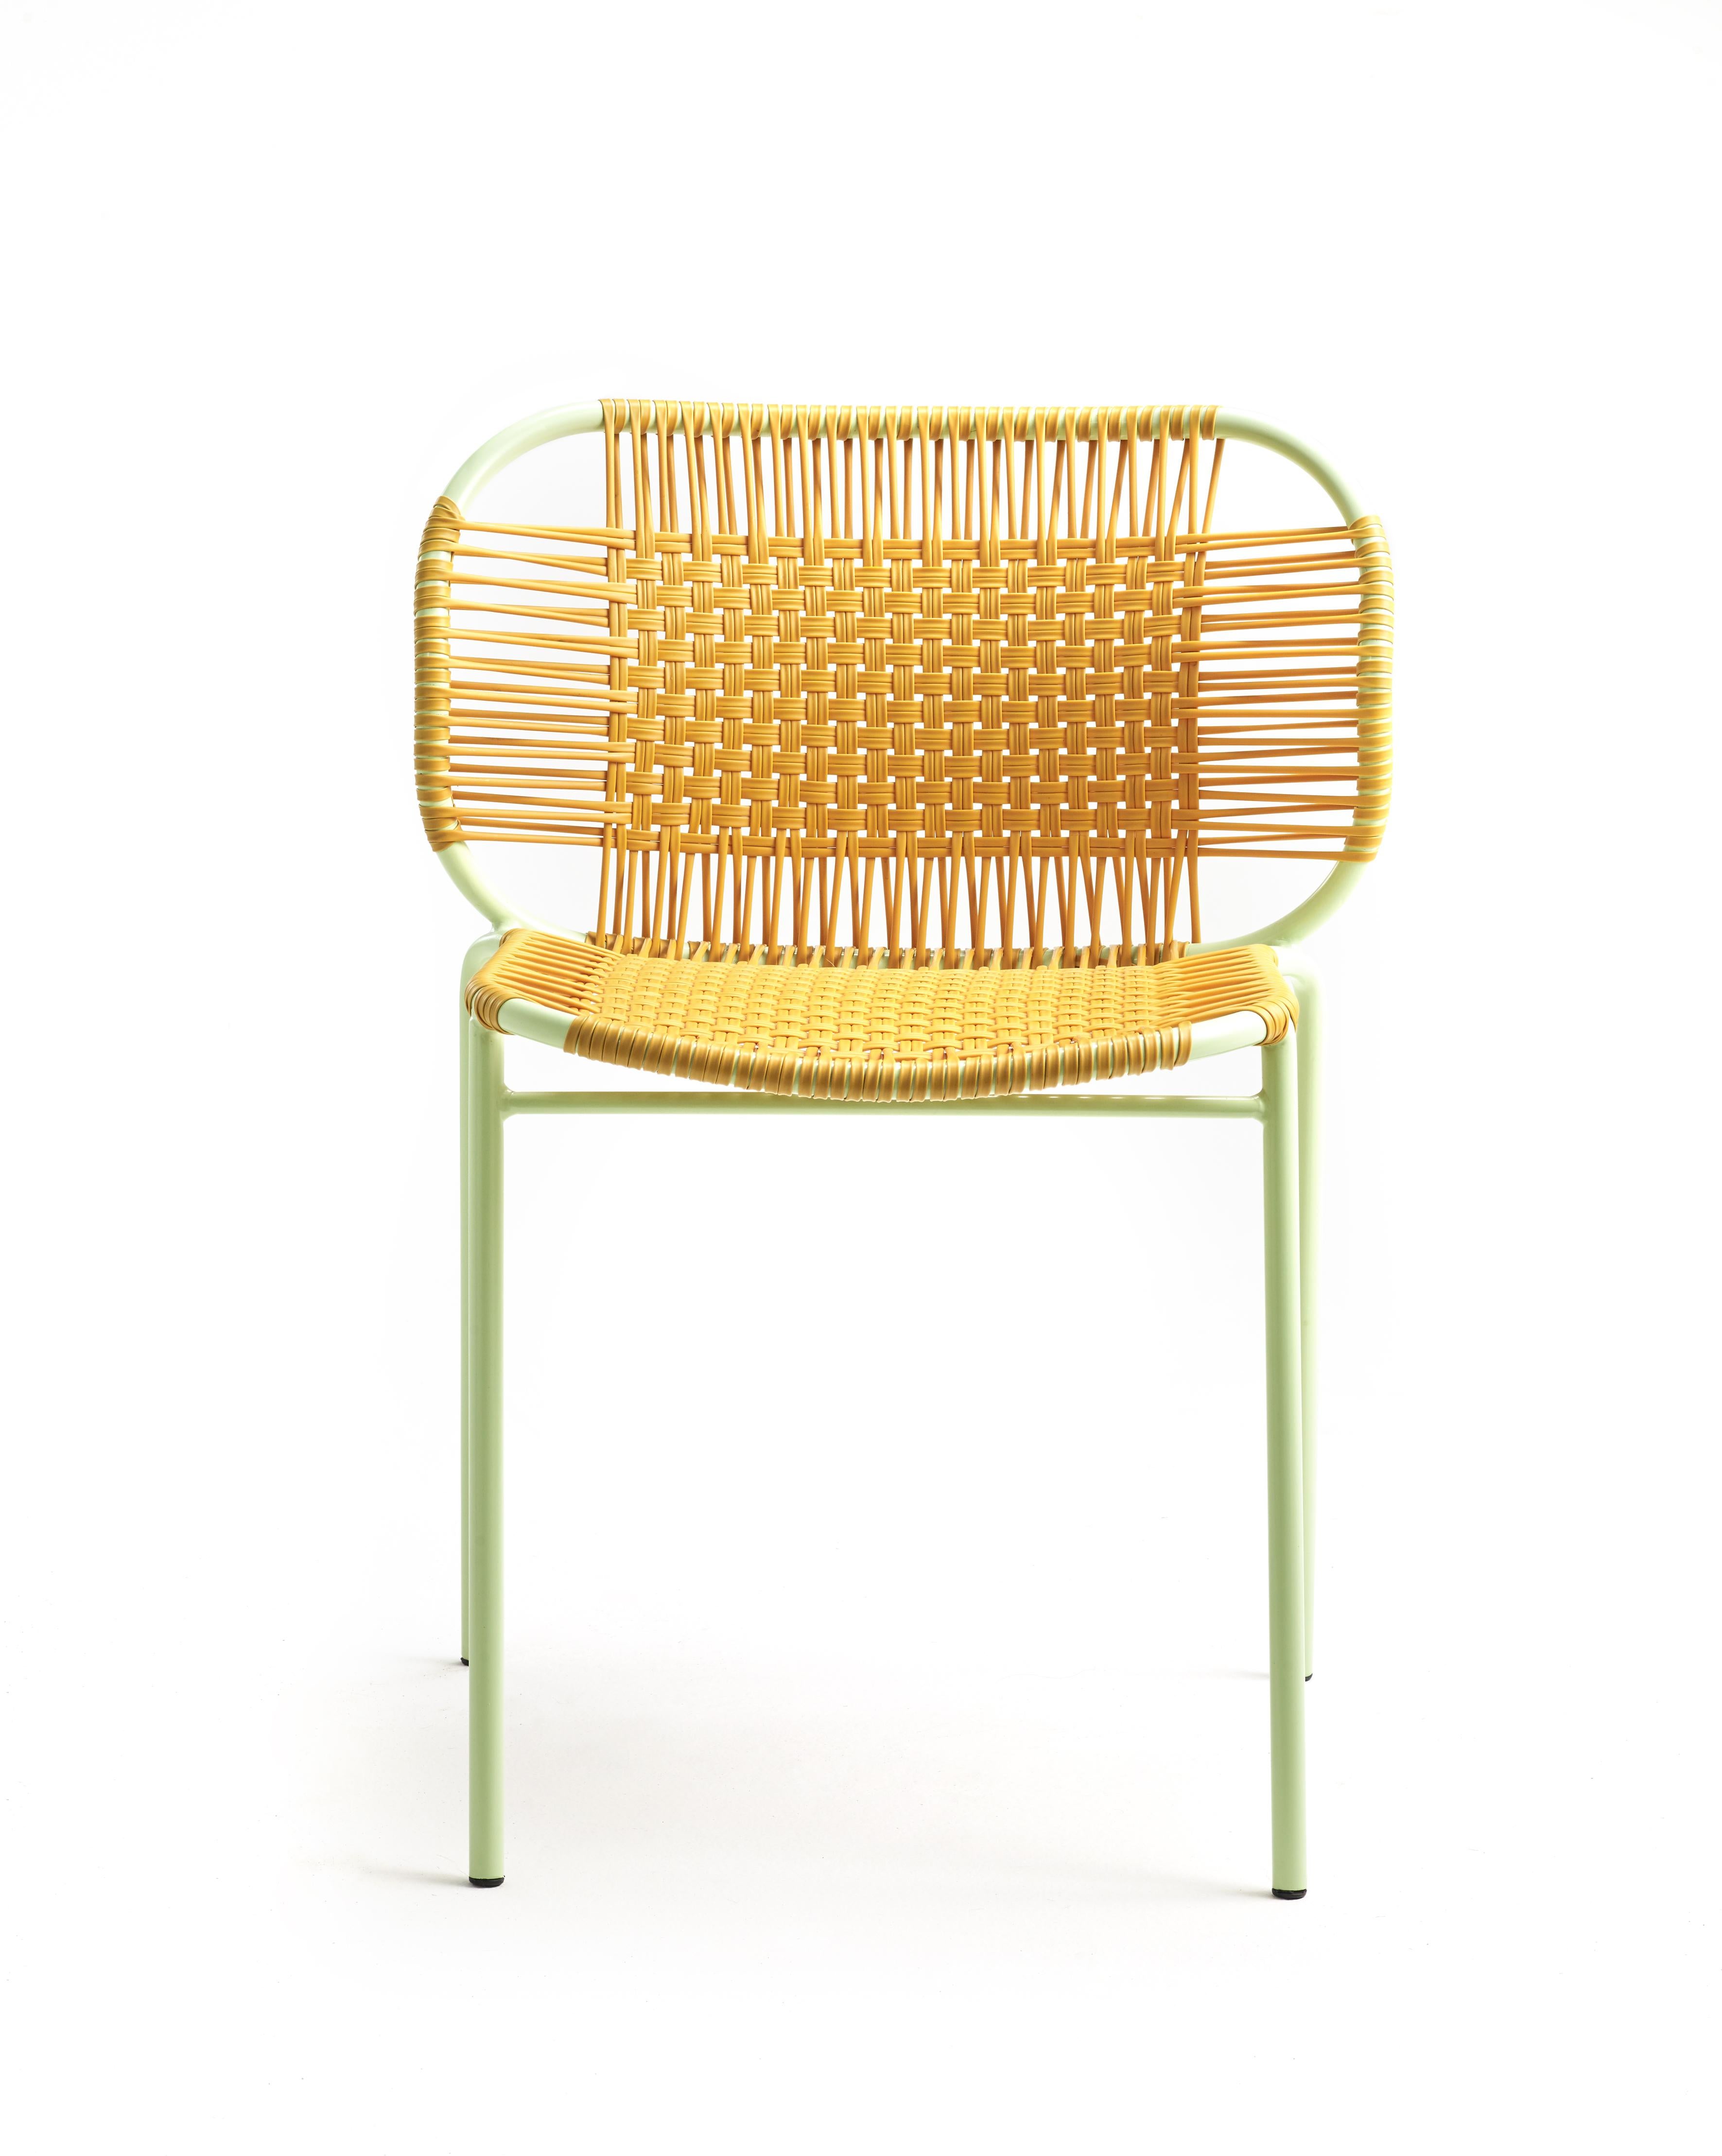 Set of 4 honey Cielo stacking chair by Sebastian Herkner.
Materials: PVC strings, powder-coated steel frame. 
Technique: Made from recycled plastic and weaved by local craftspeople in Cartagena, Colombia. 
Dimensions: W 56 x D 51.4 x H 78 cm